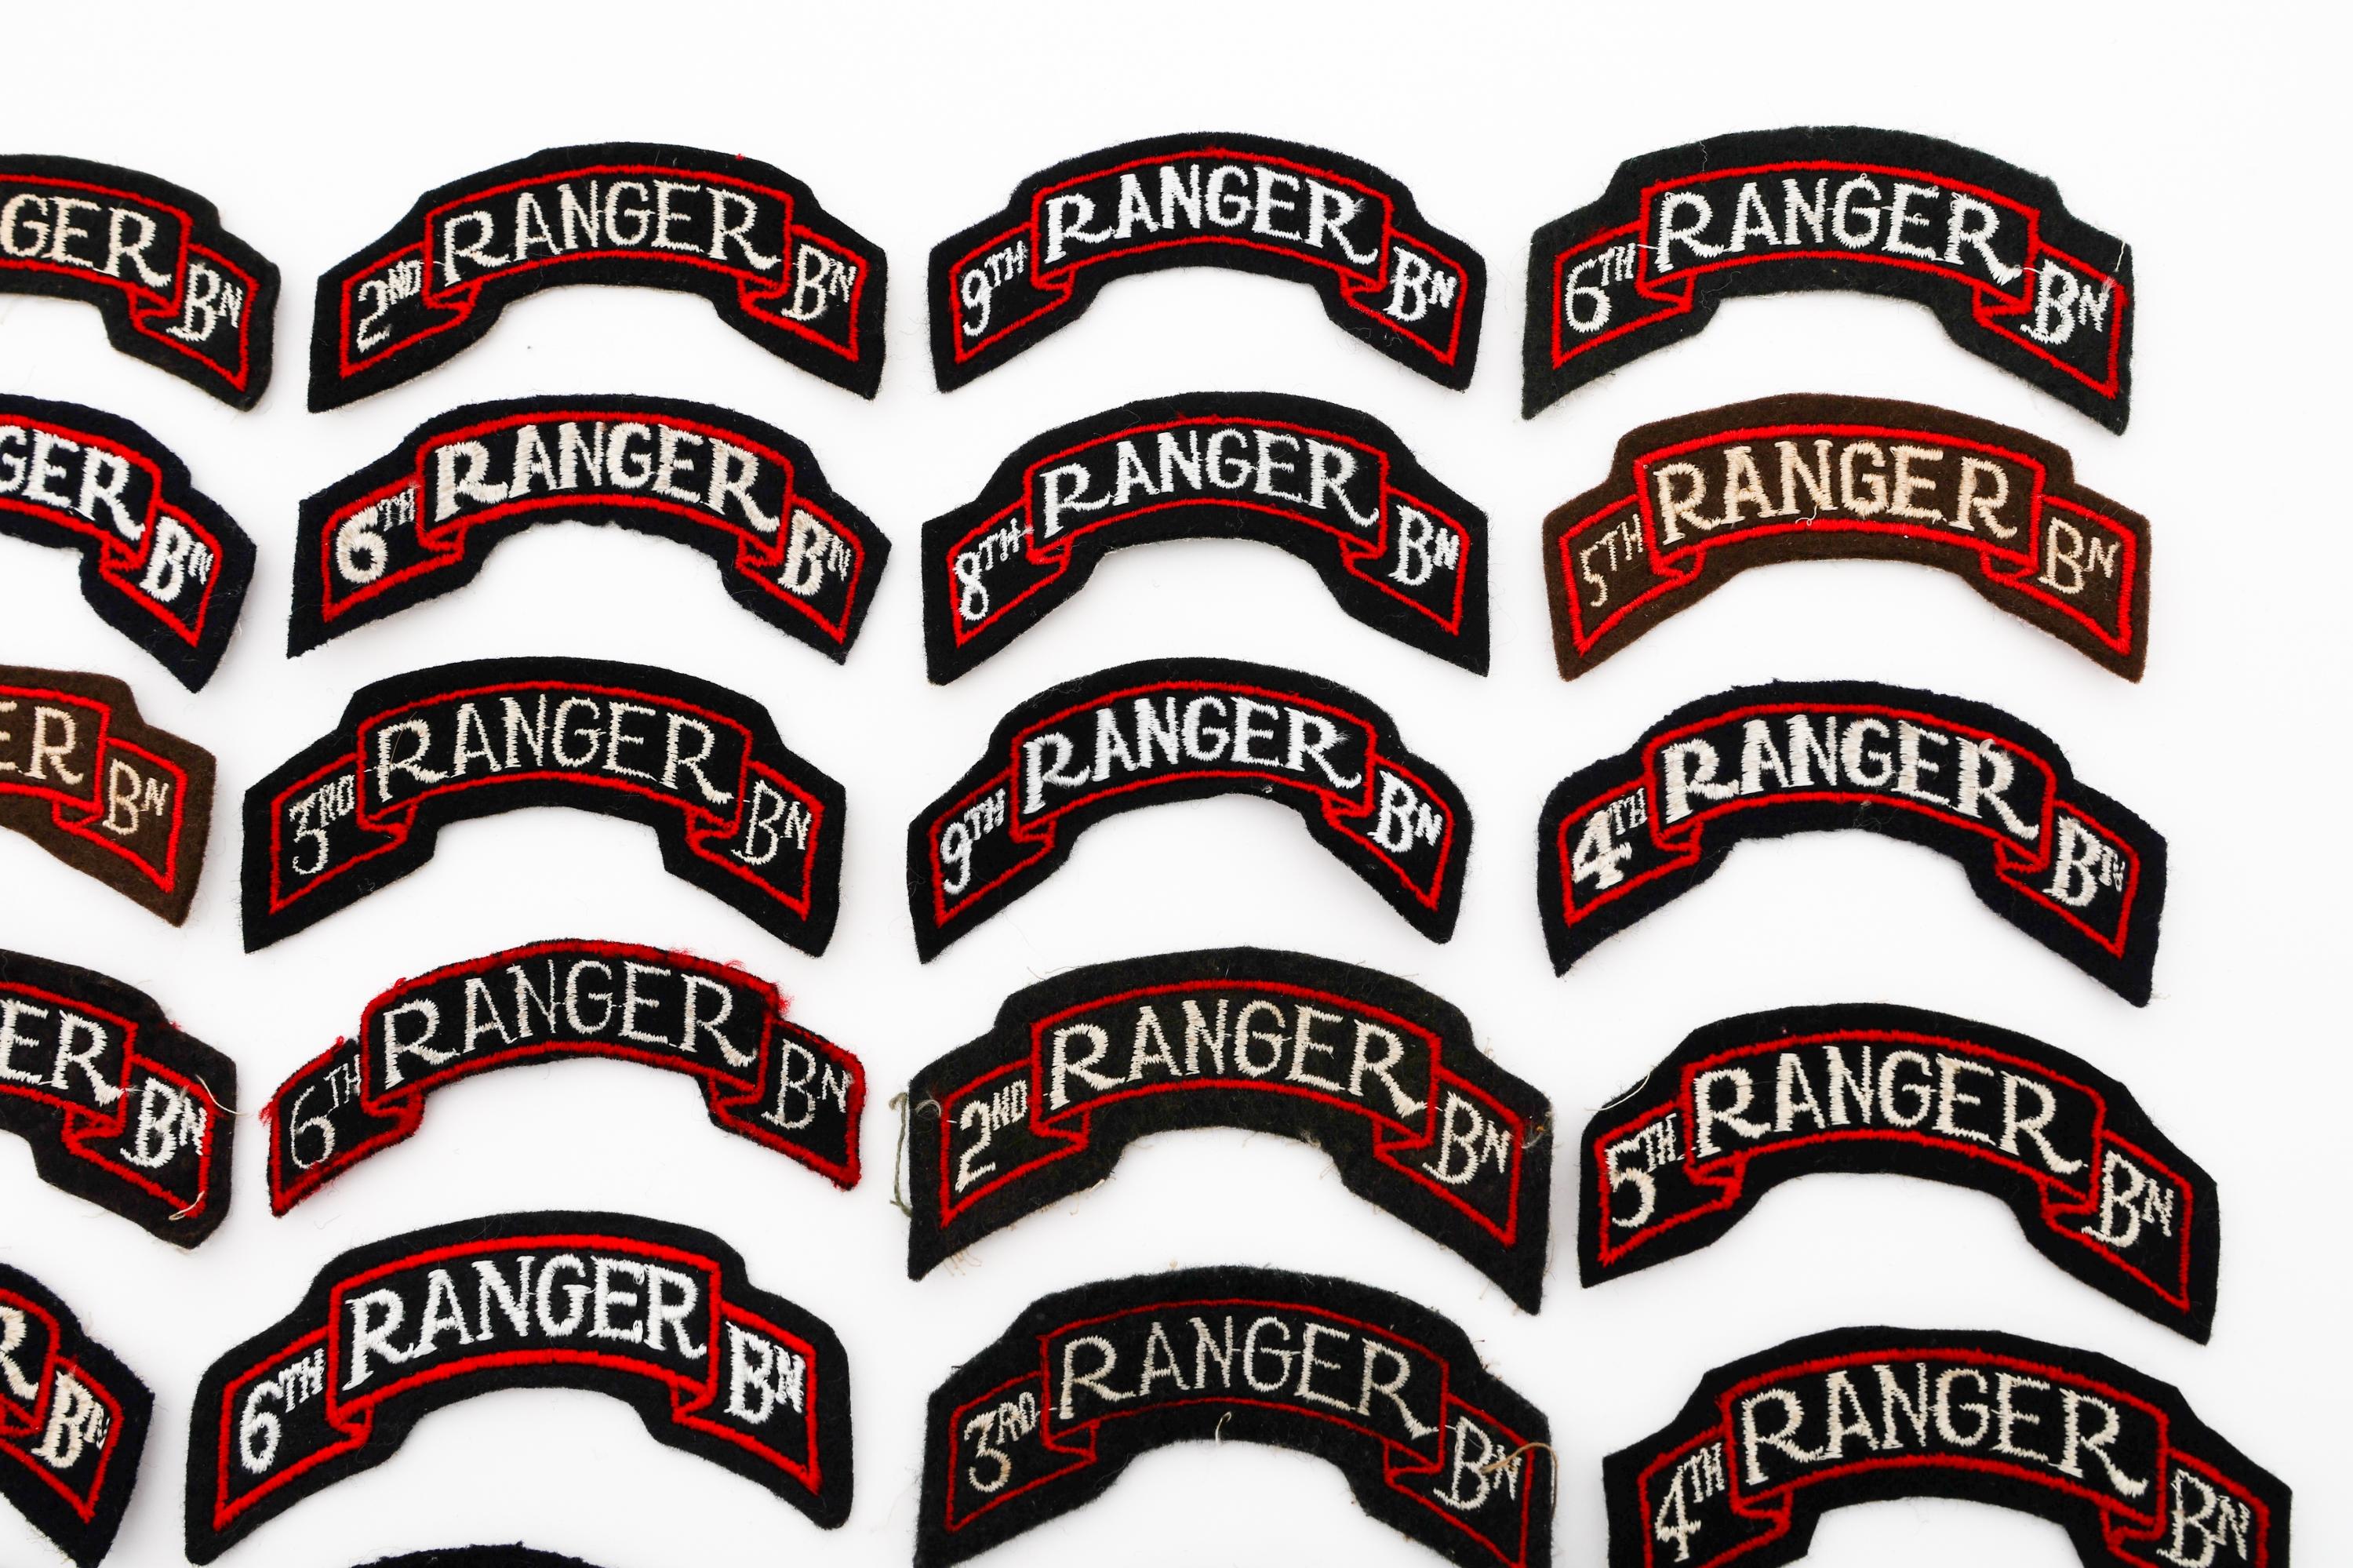 WWII - COLD WAR US ARMY RANGER BATTALION PATCHES